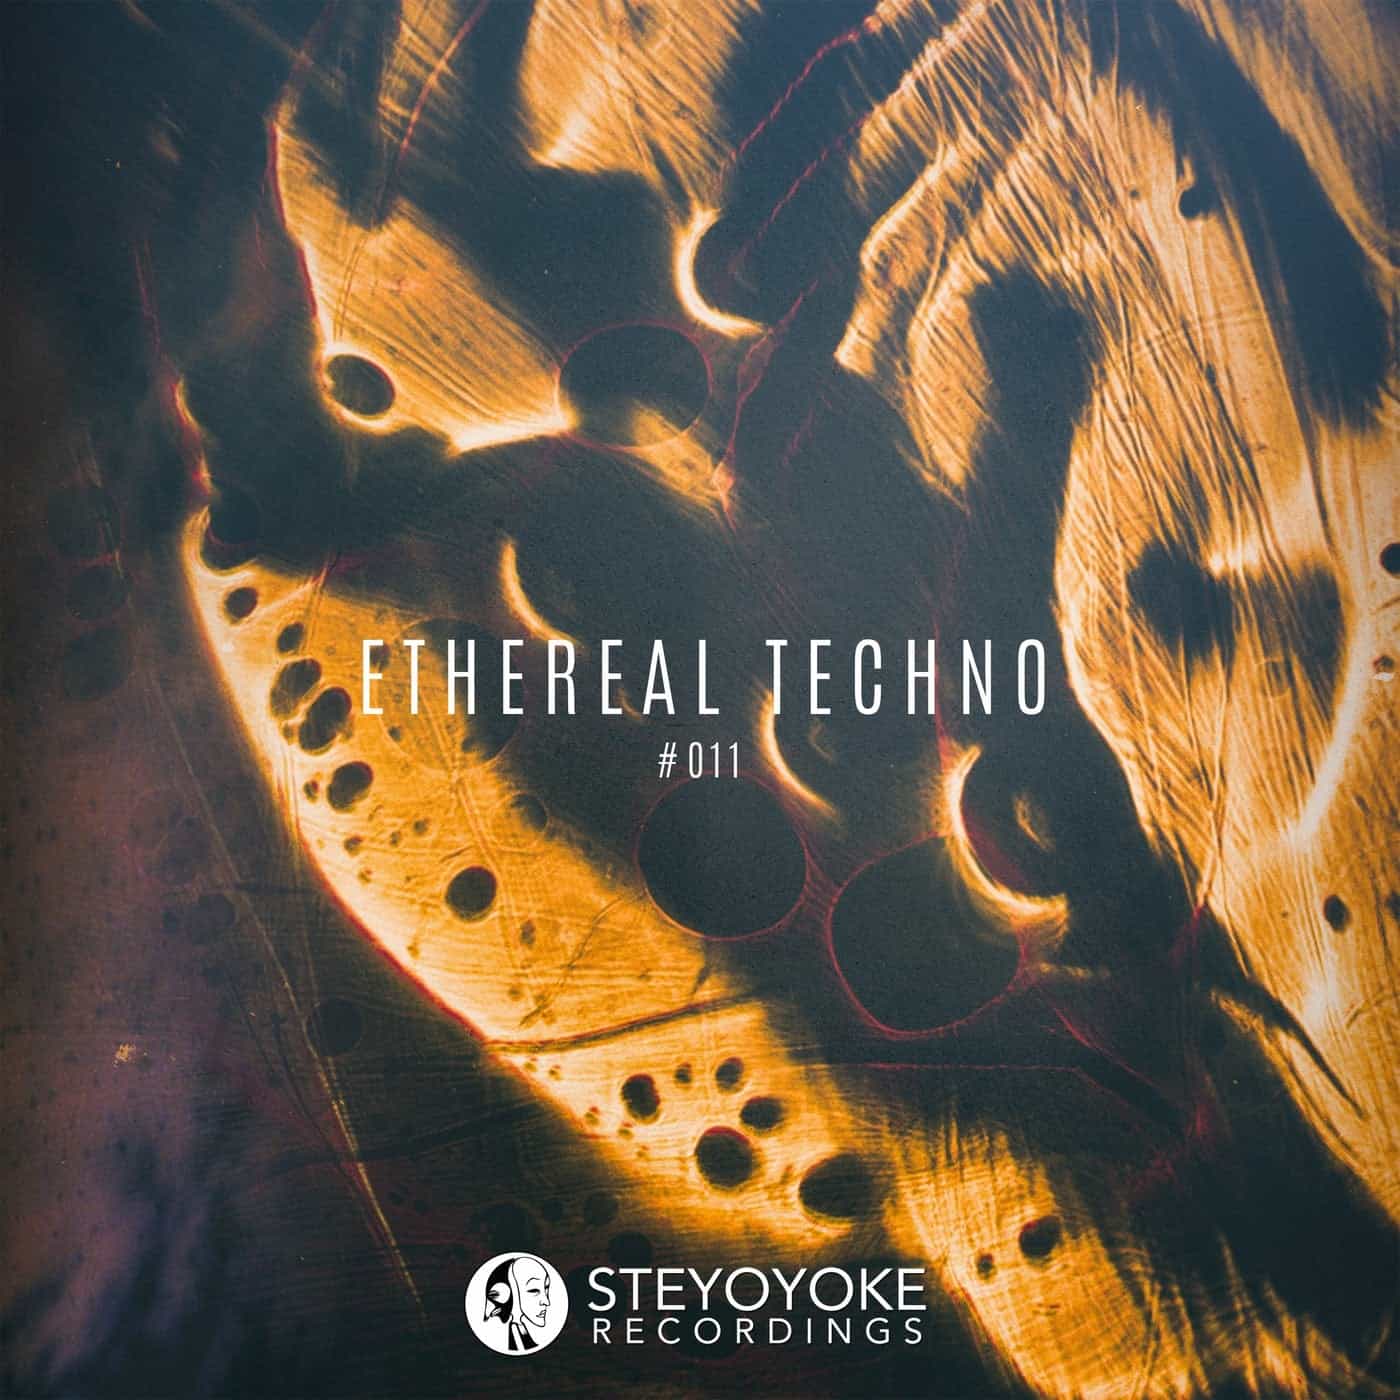 Download Ethereal Techno #011 on Electrobuzz